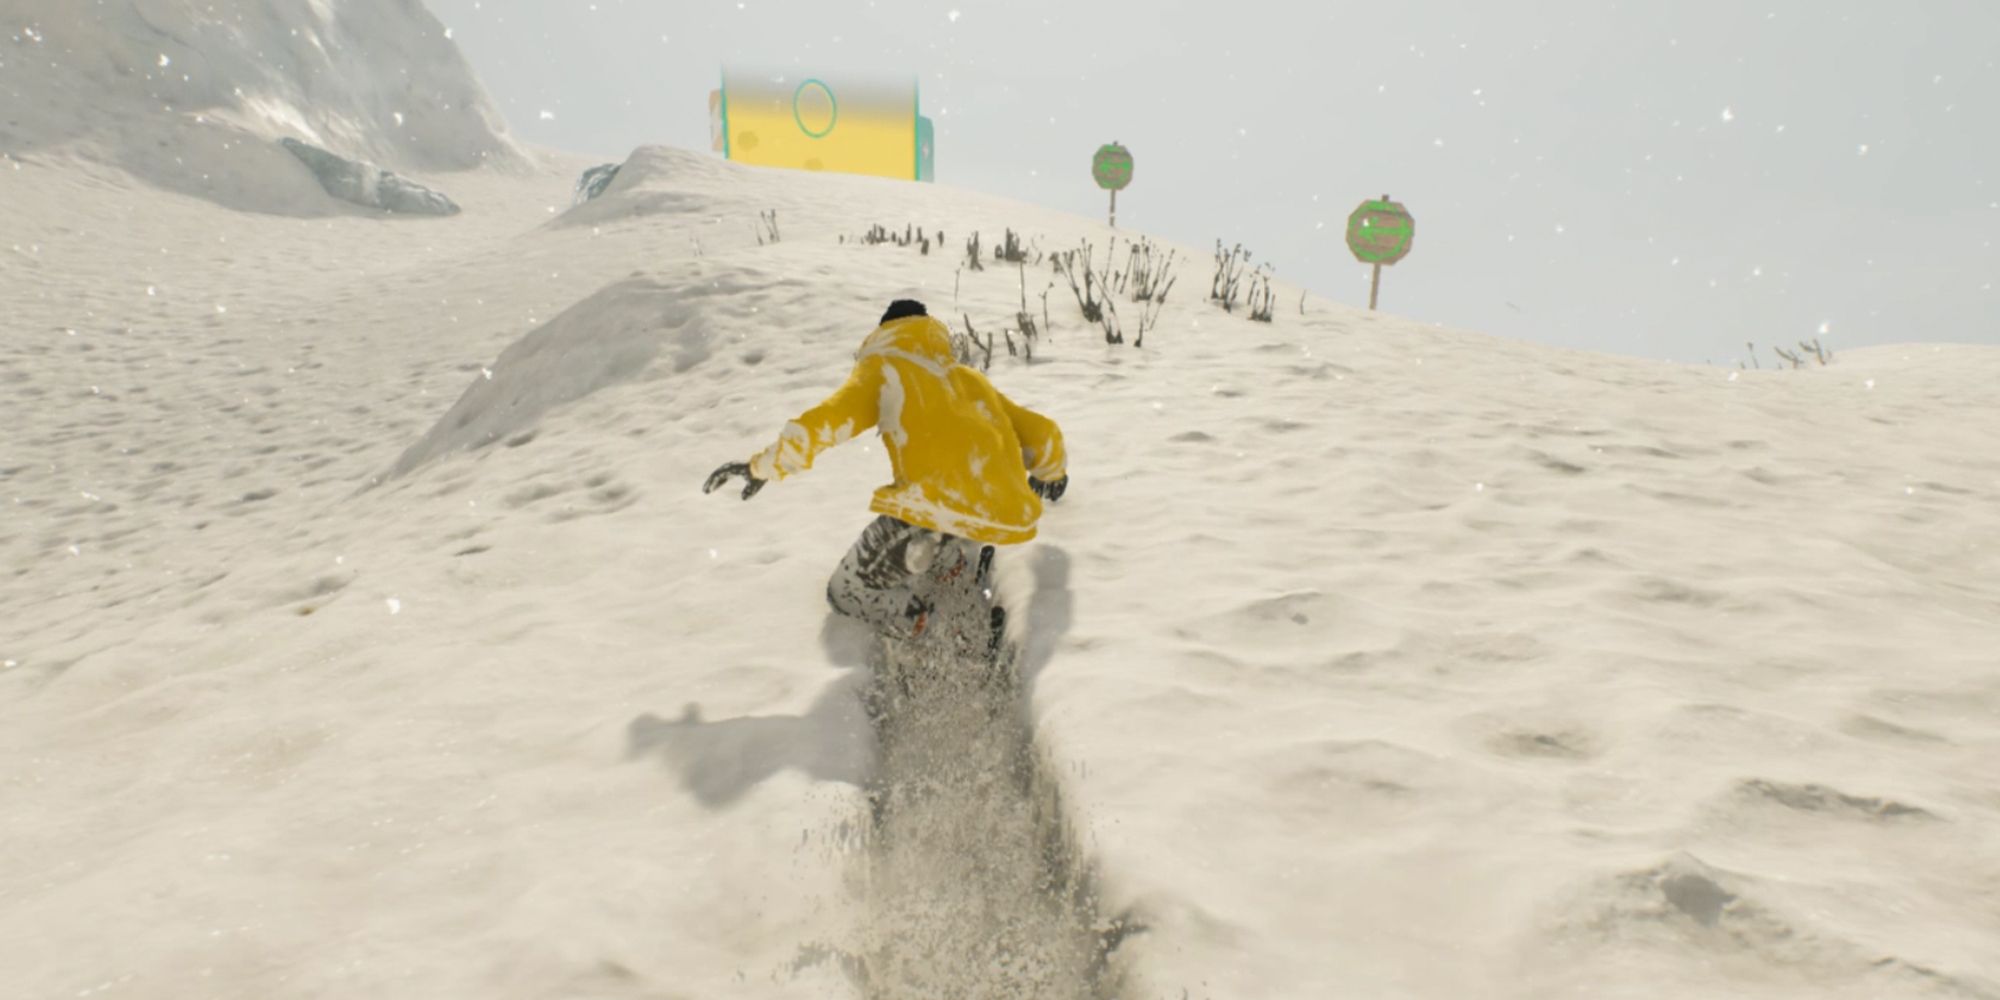 Riders Republic. Snowboarding in deep snow. Bright atmosphere. Wearing yellow jacket.